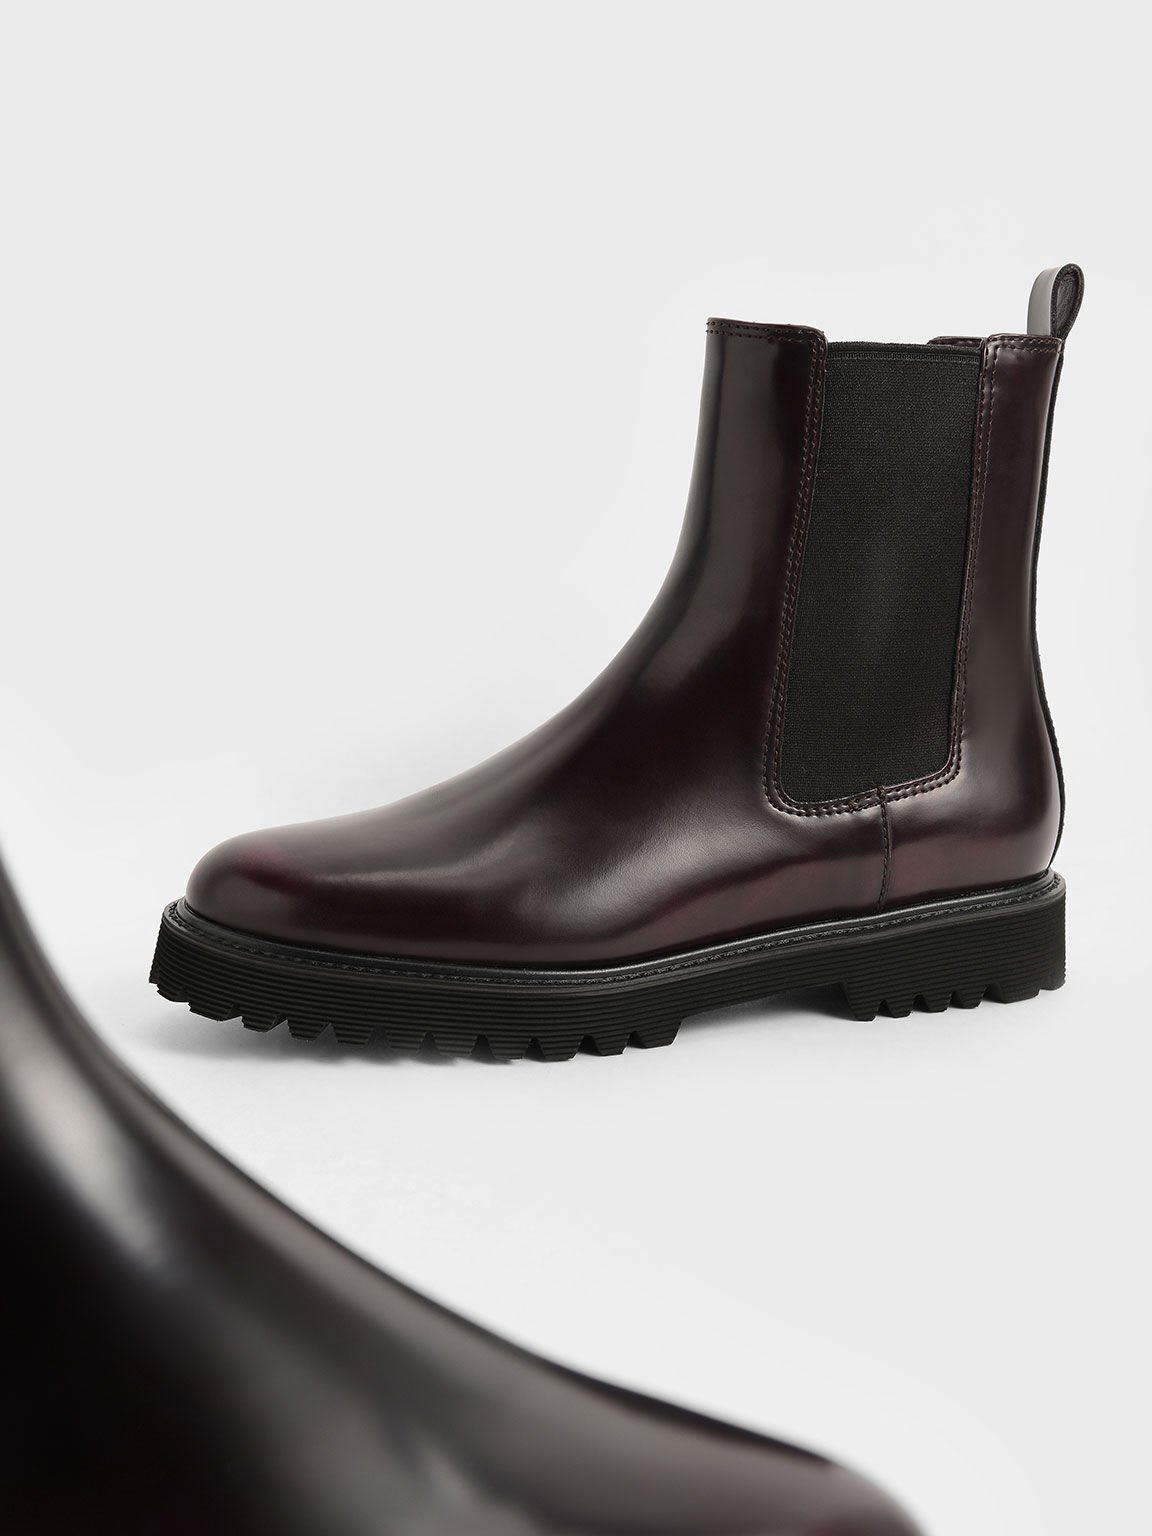 Cleated Sole Chelsea Boots, Burgundy, hi-res